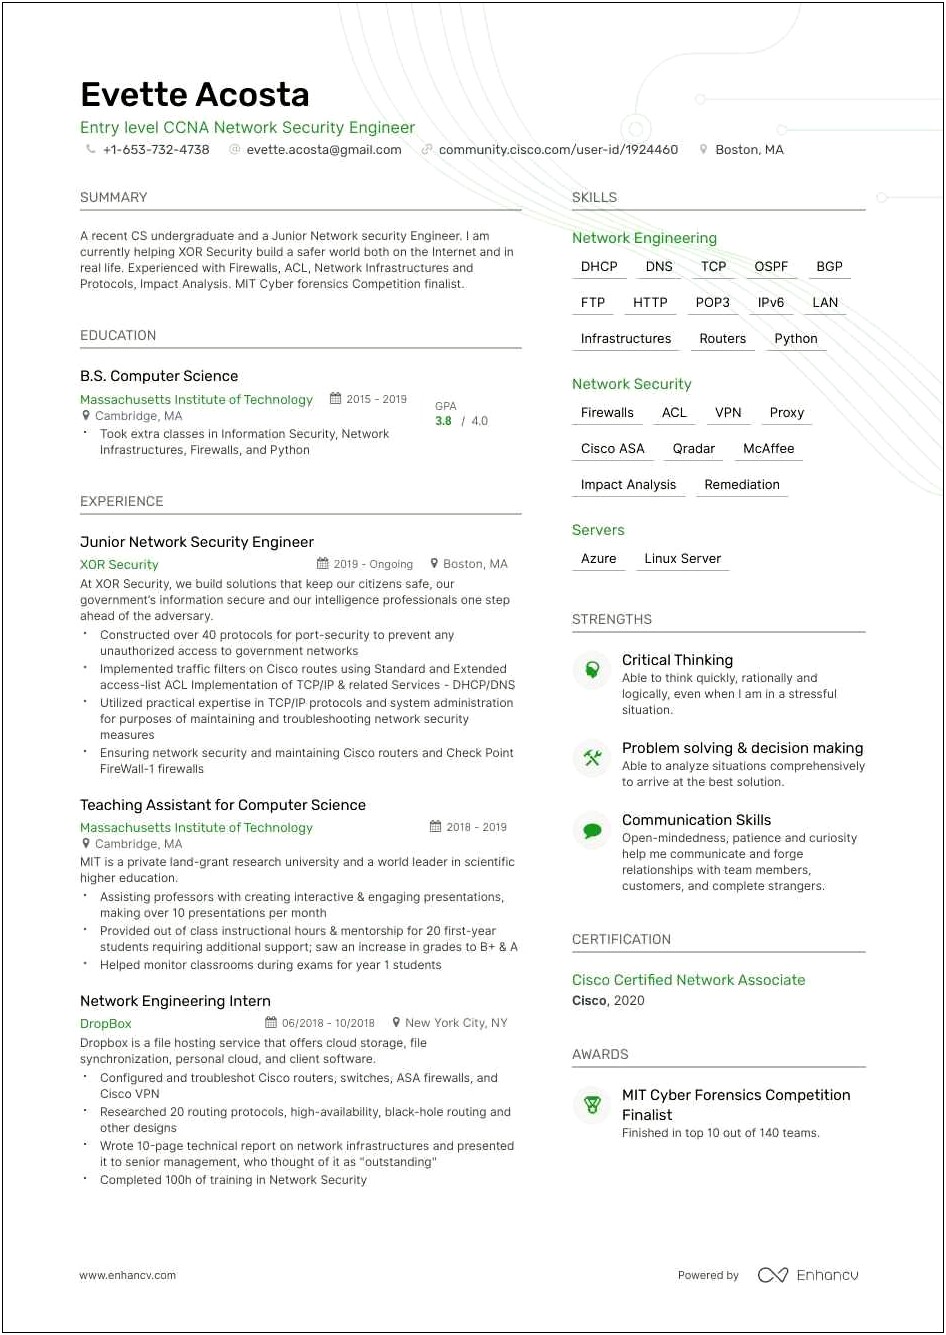 Resume Summary For Computer Science Student